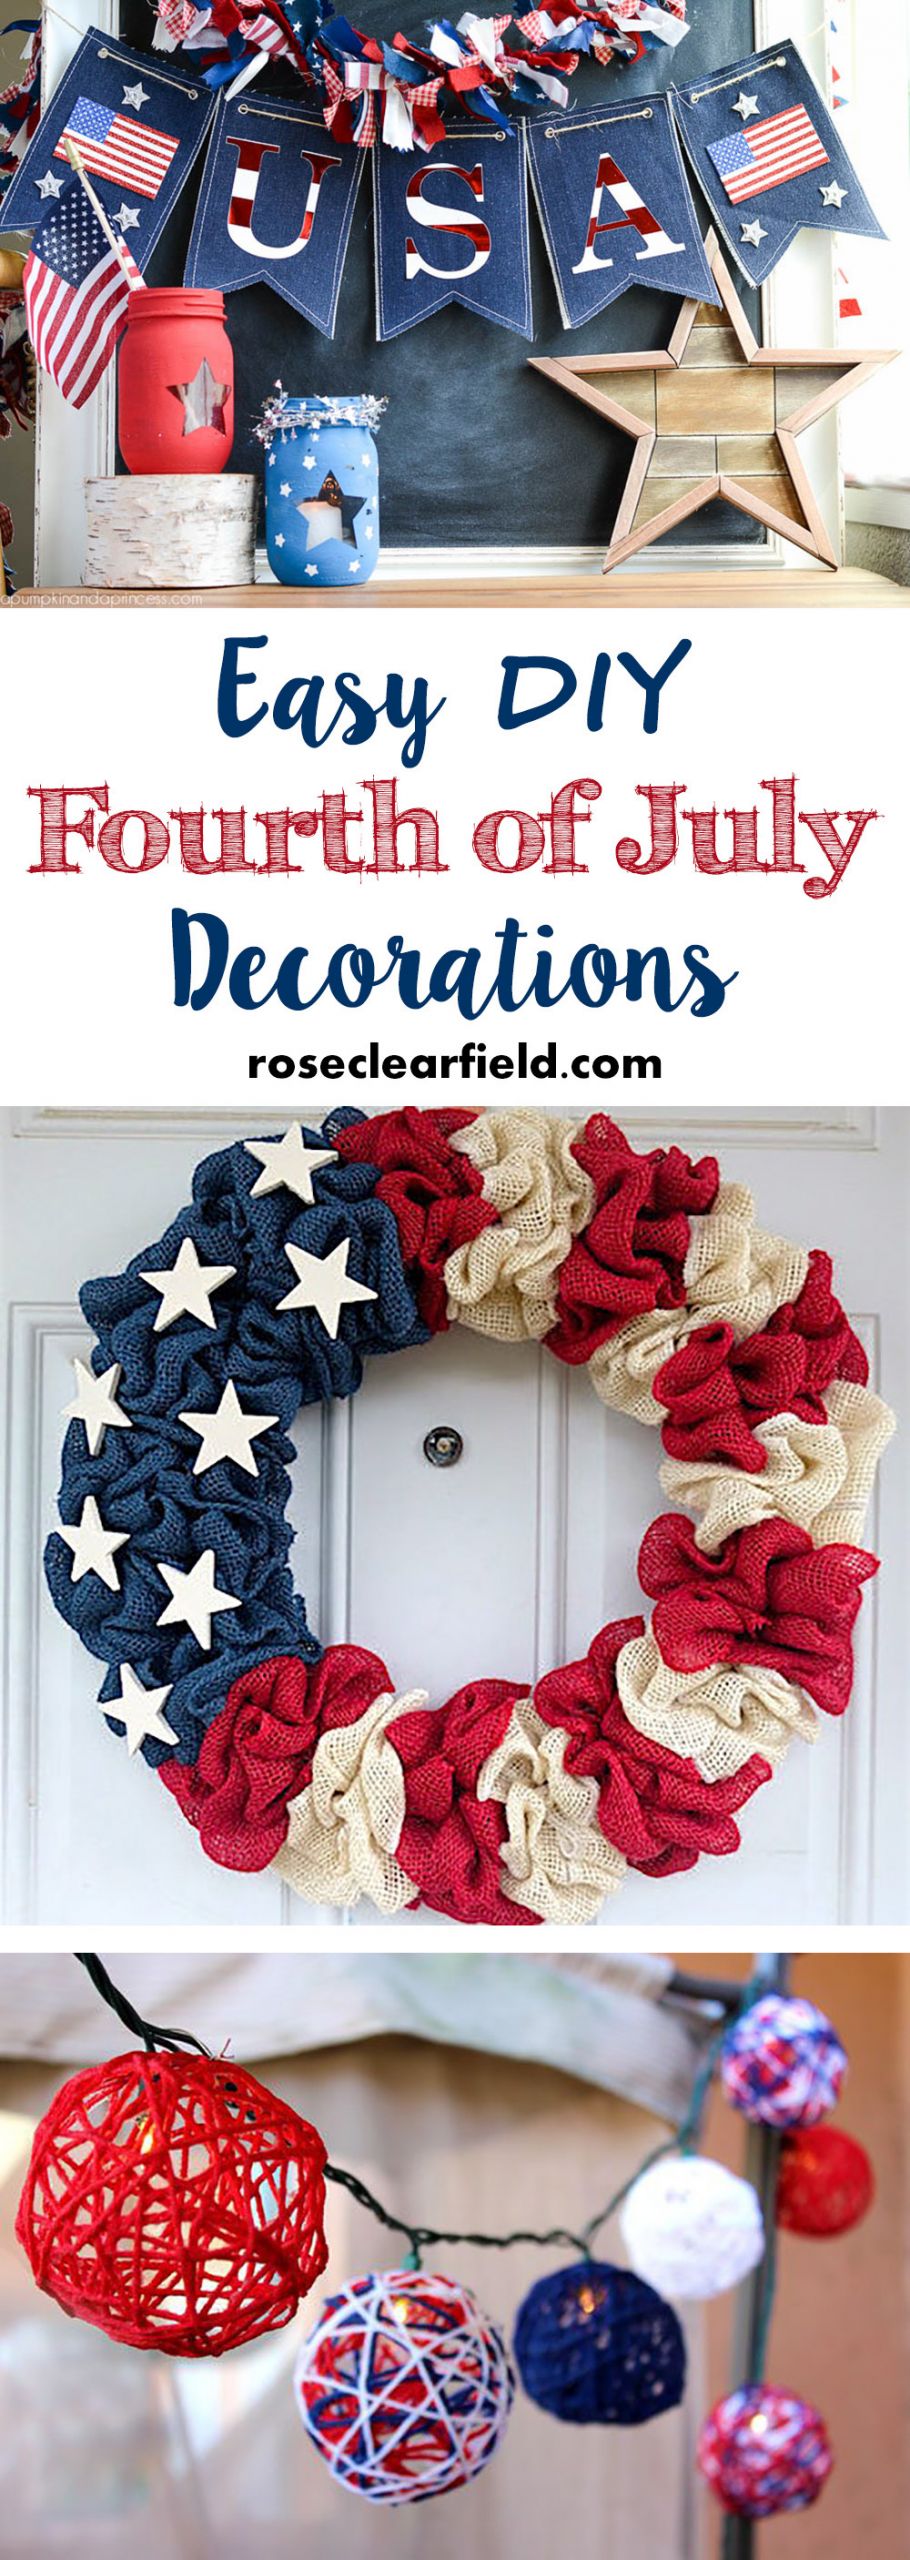 4th Of July Decorations Diy
 Easy DIY Fourth of July Decorations • Rose Clearfield